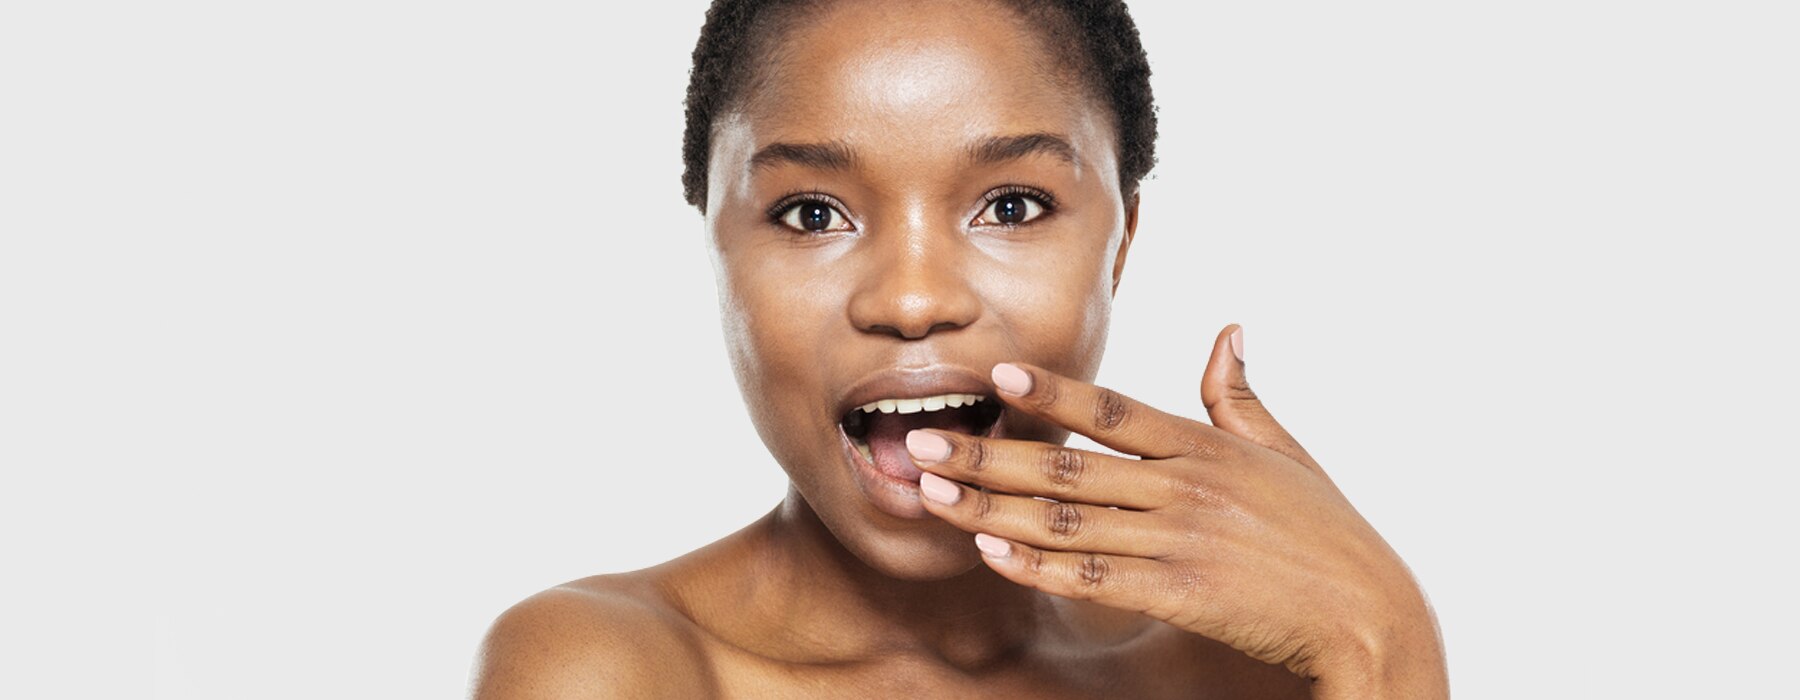 Things you probably didn't know about your skin